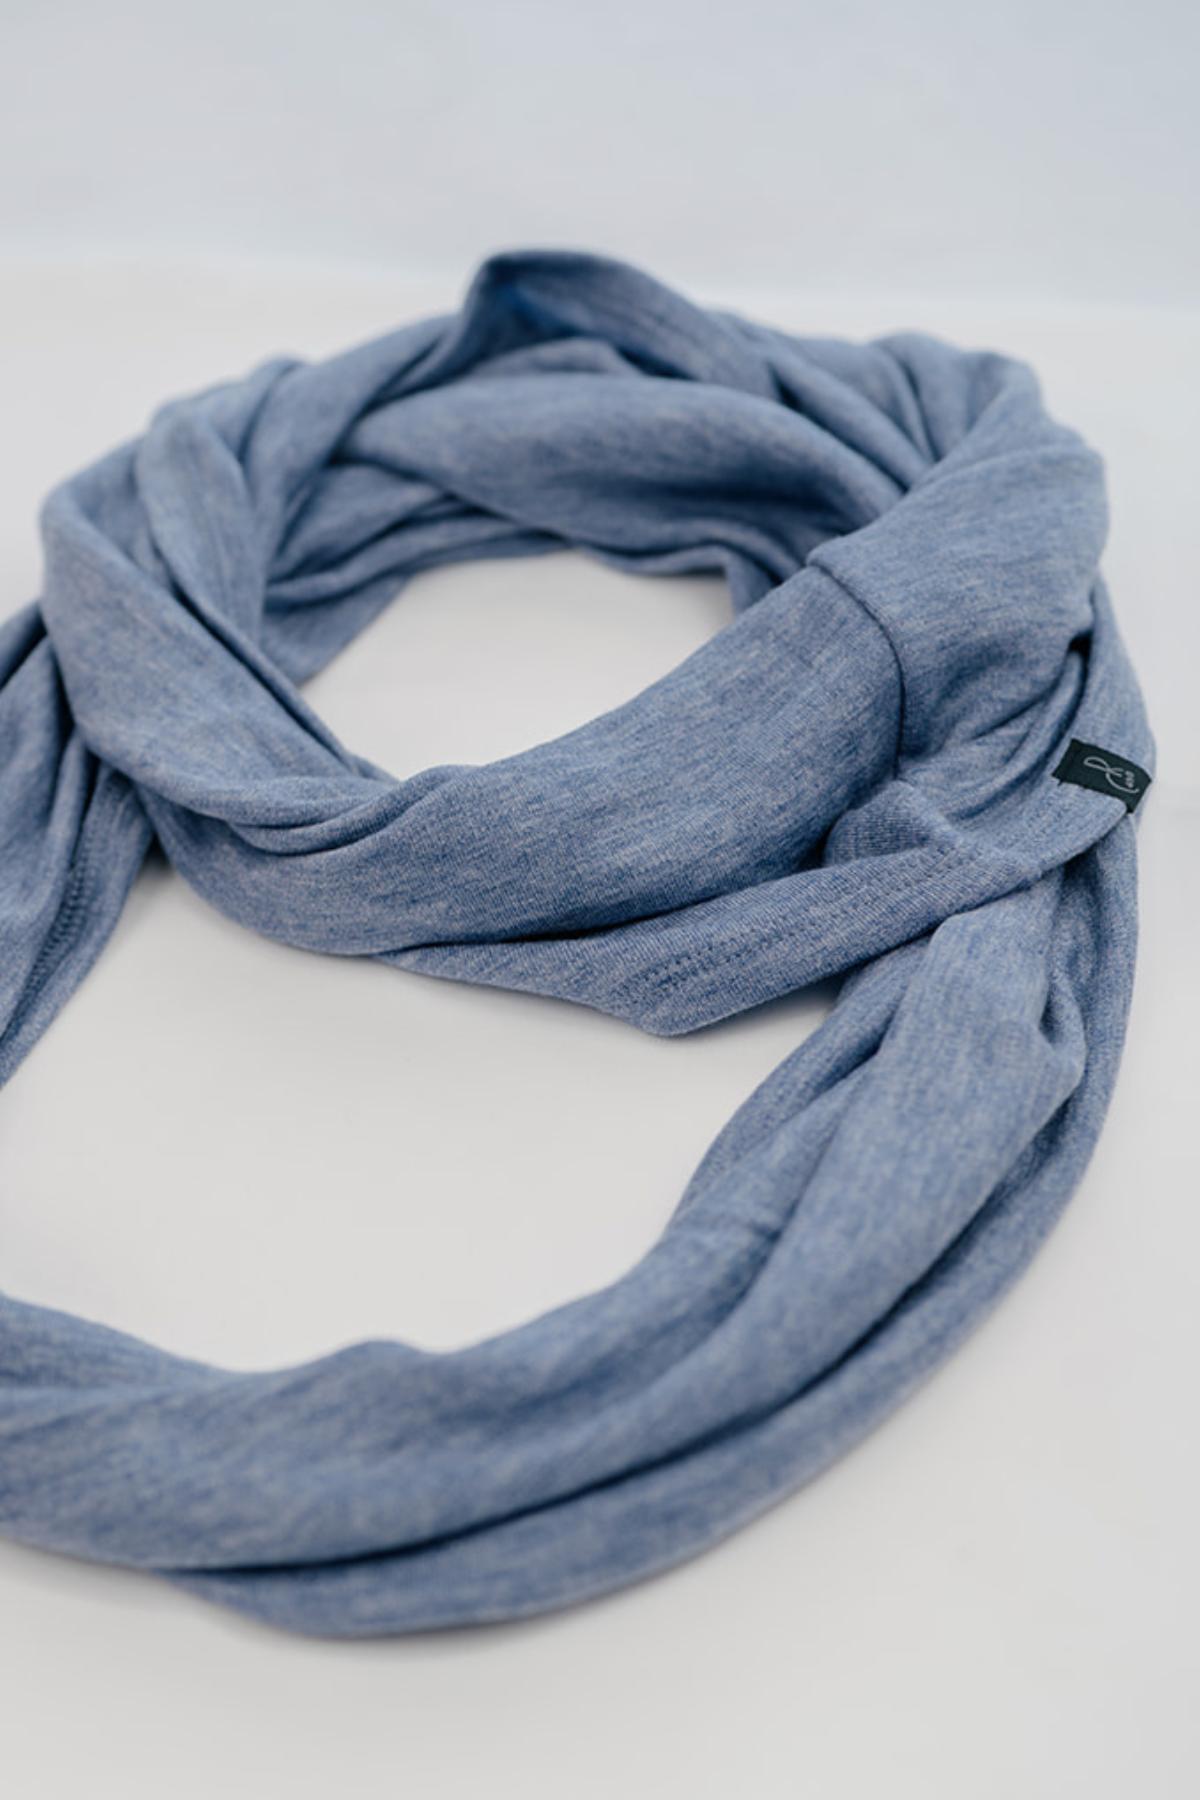 Clothes & Roads, Merino Wool Infinity Scarf